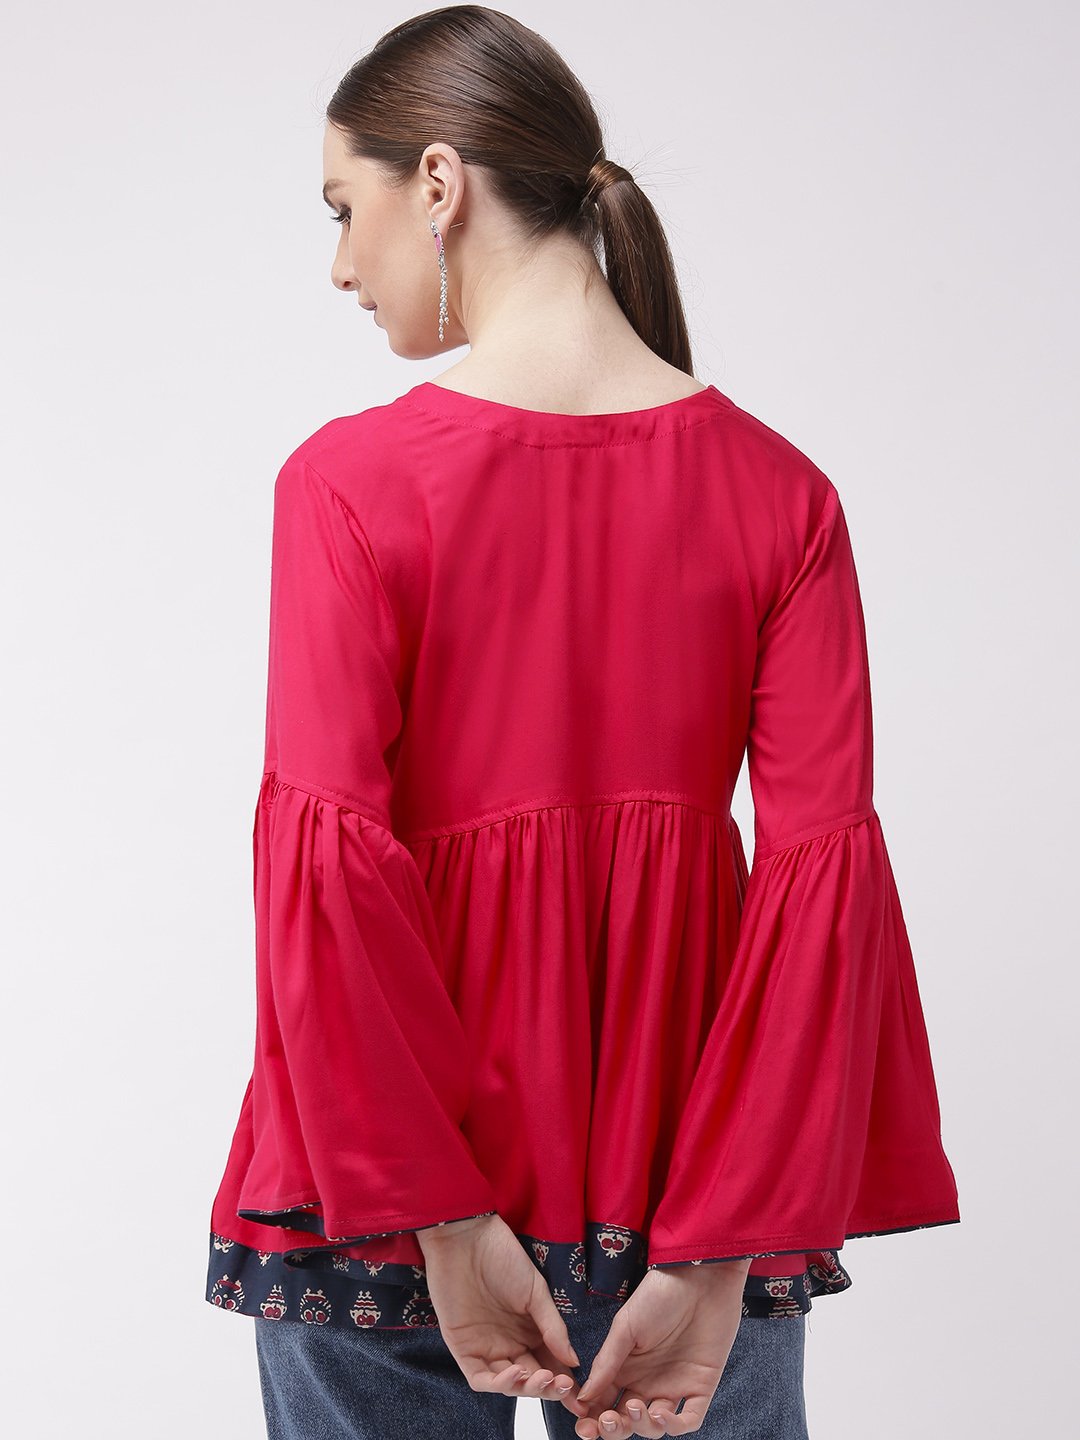 Pink Bell Sleeves Top With Border